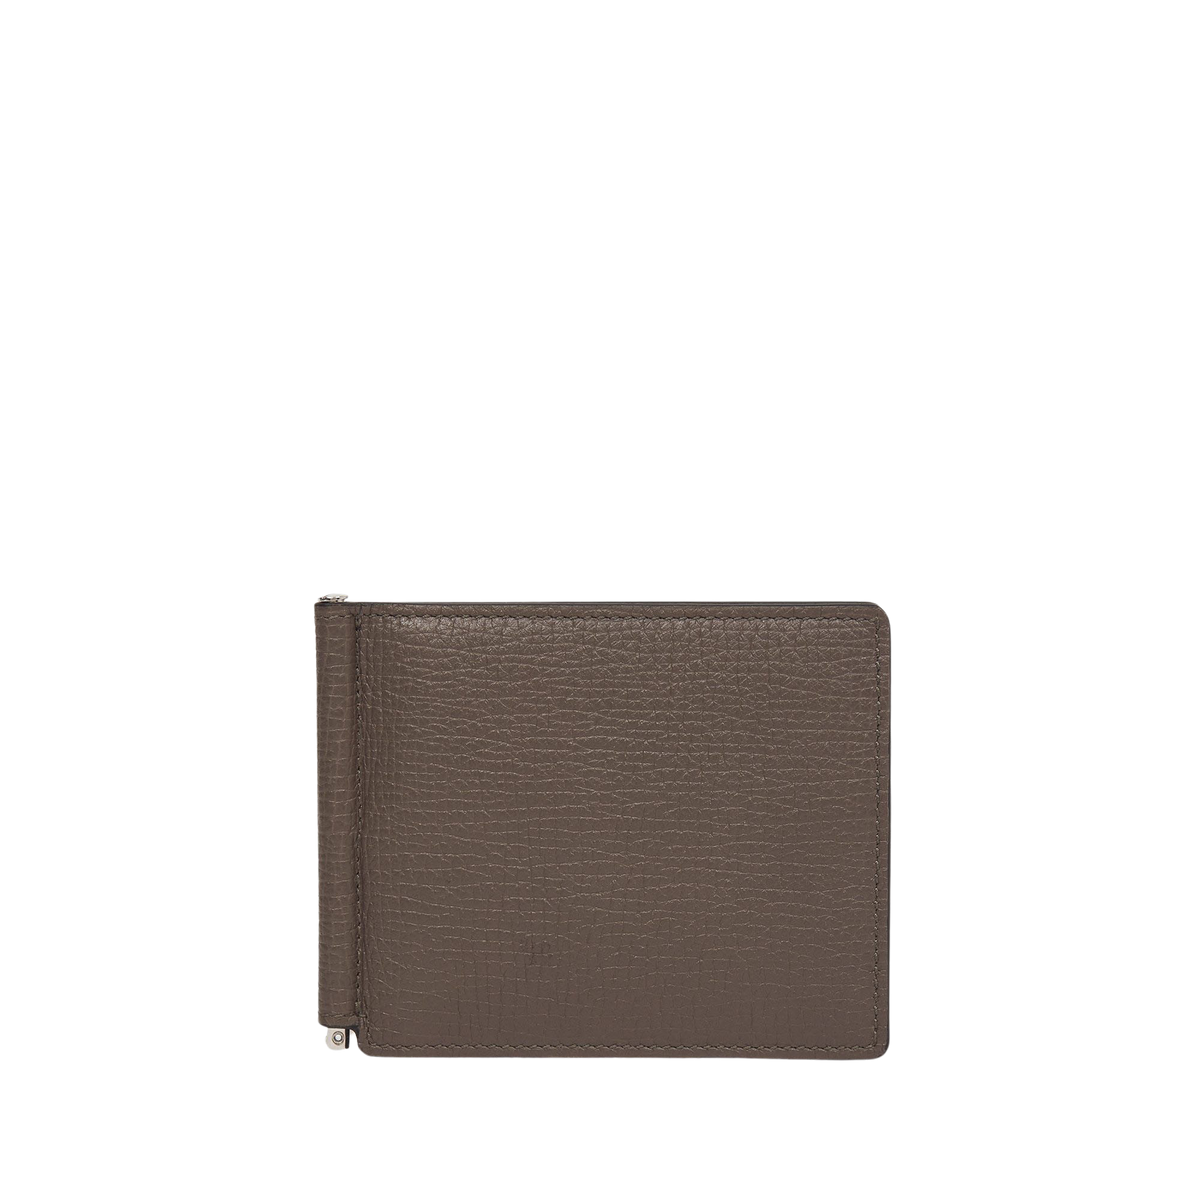 Smythson Taupe Brown Ludlow Leather Money Clip Wallet Feature